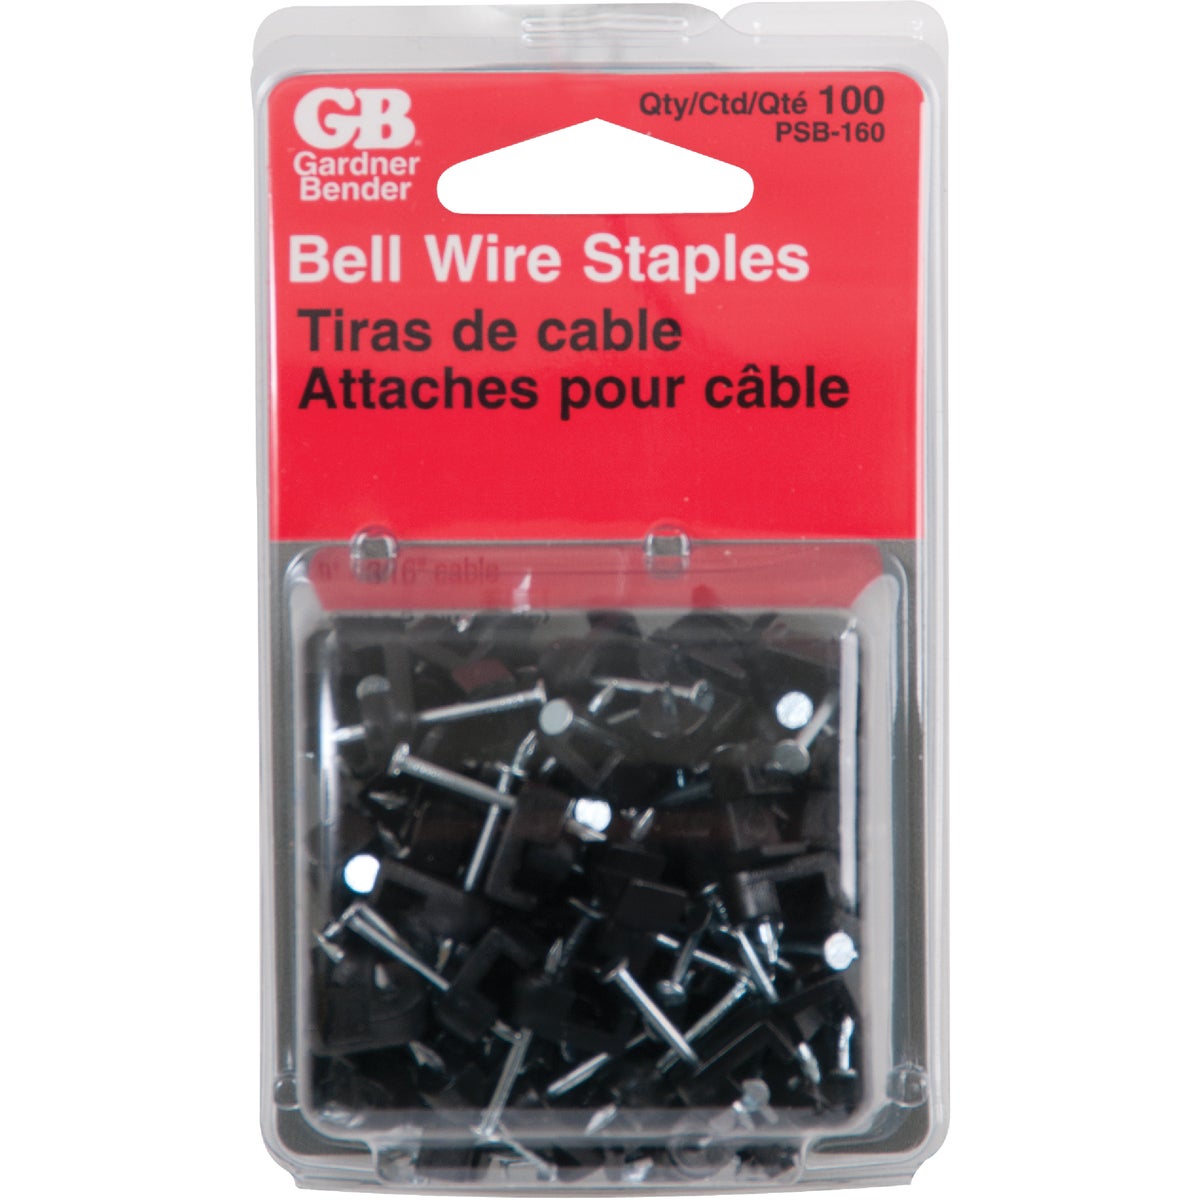 Item 501081, Low volt staple secures bell, speaker, thermostat, and telephone wire.